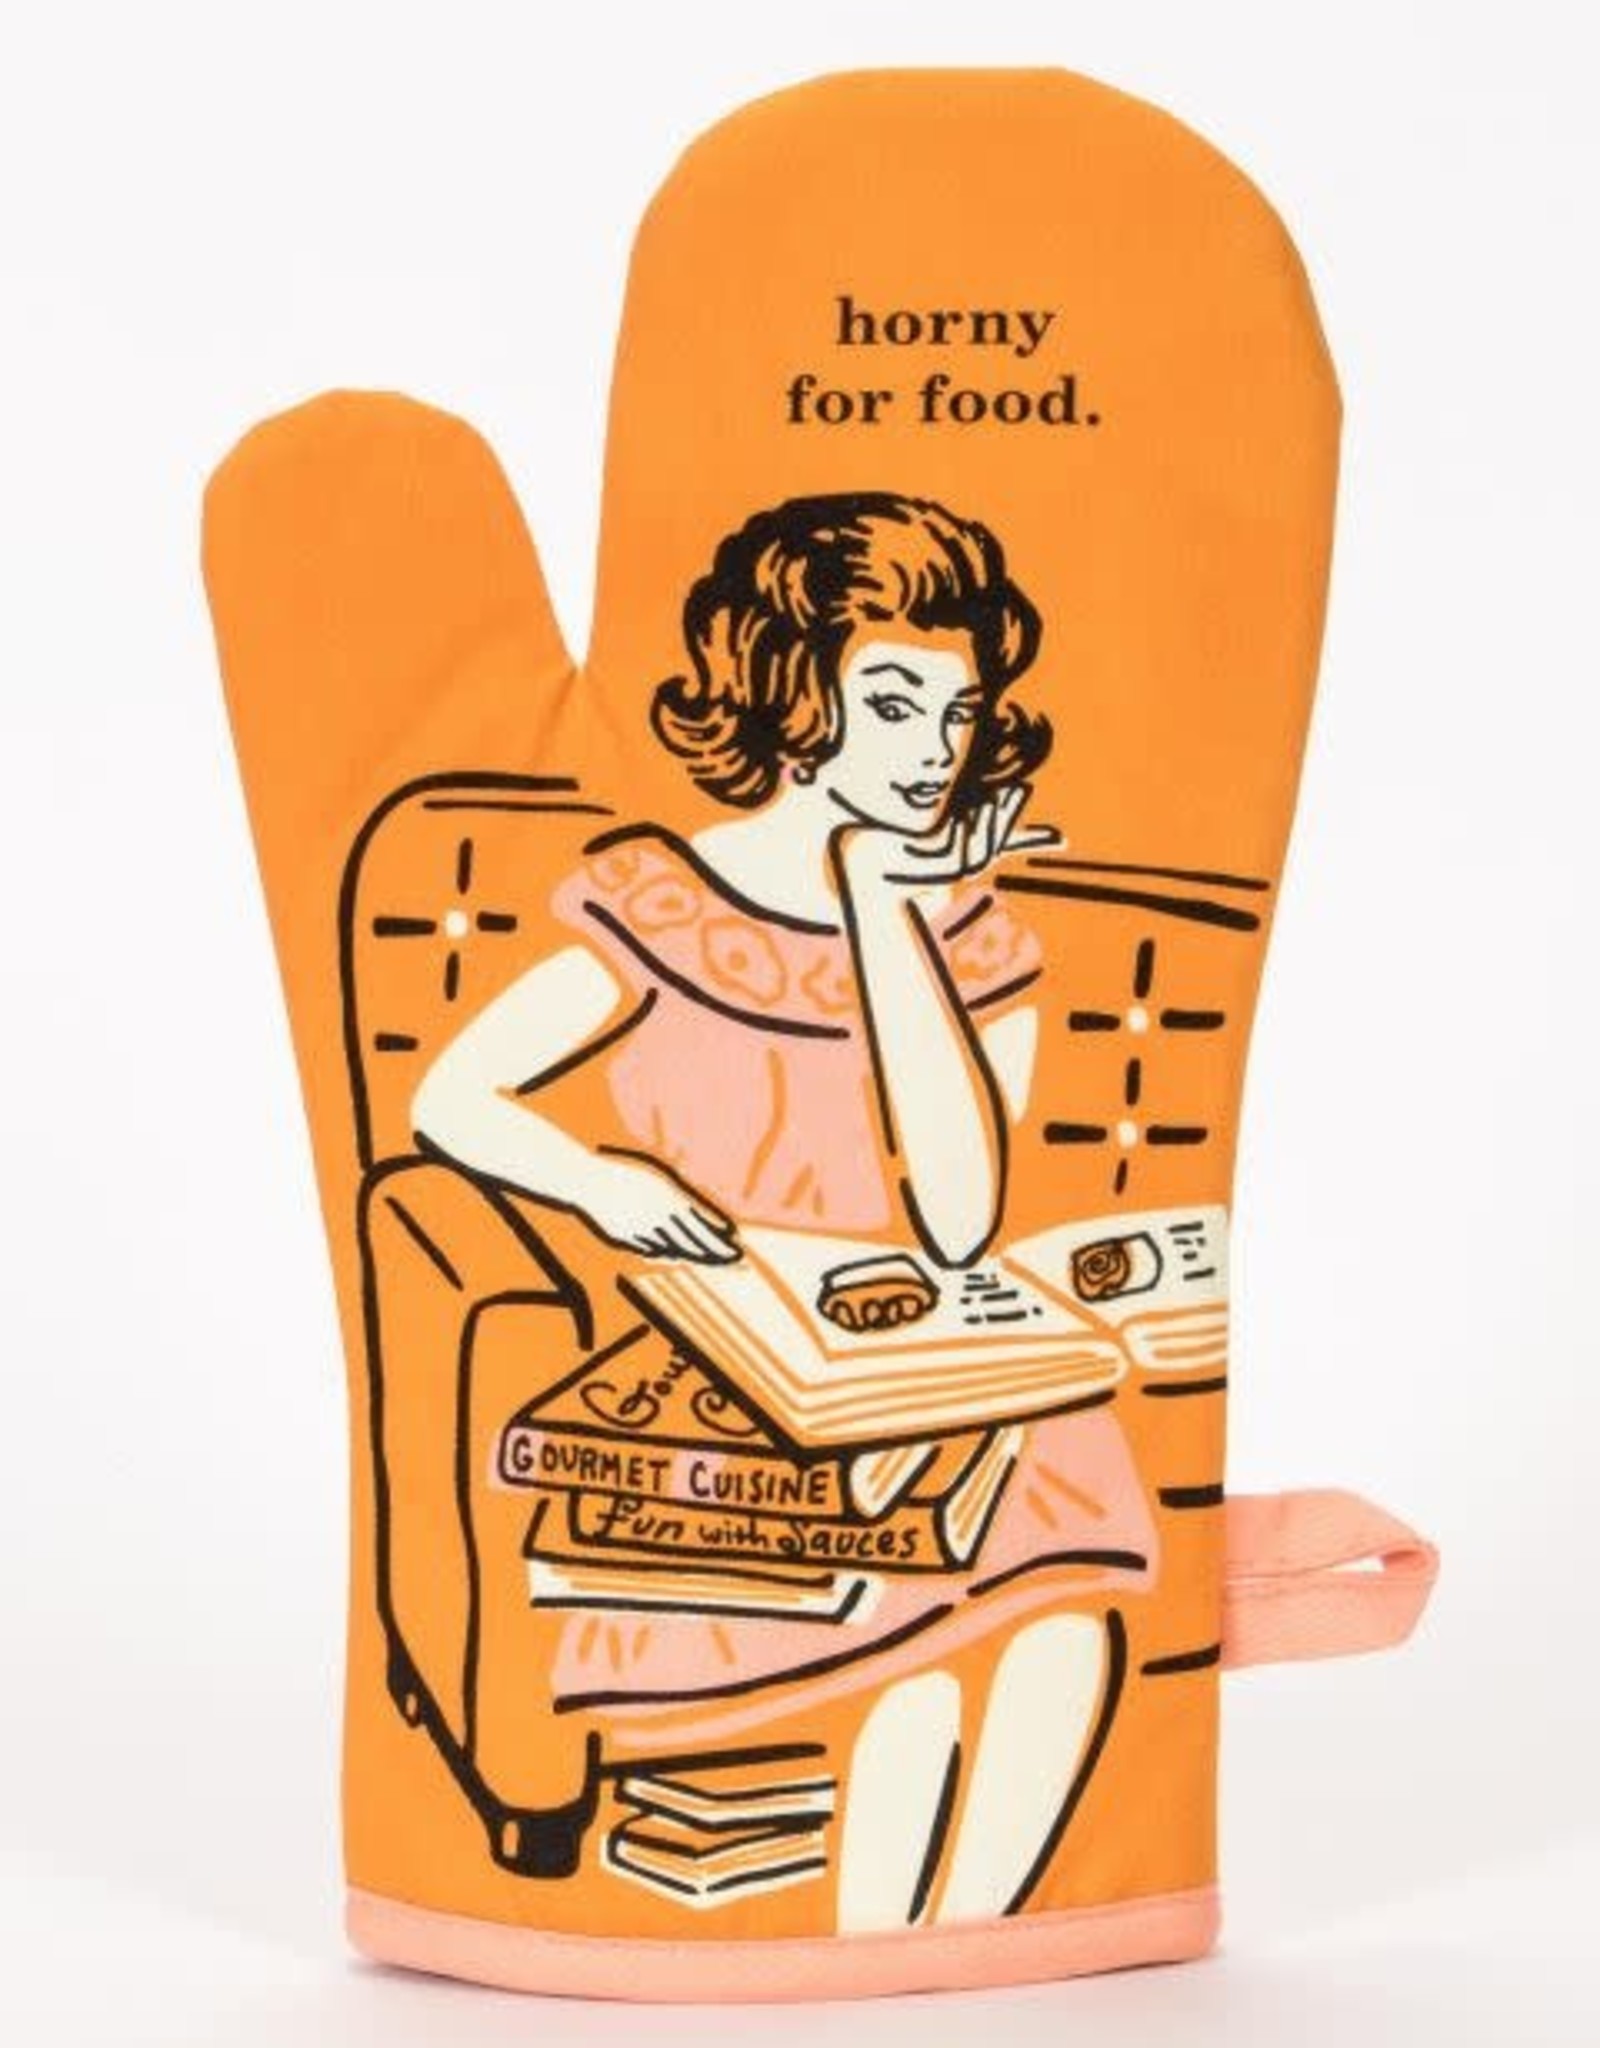 Horny for Food Oven Mitt